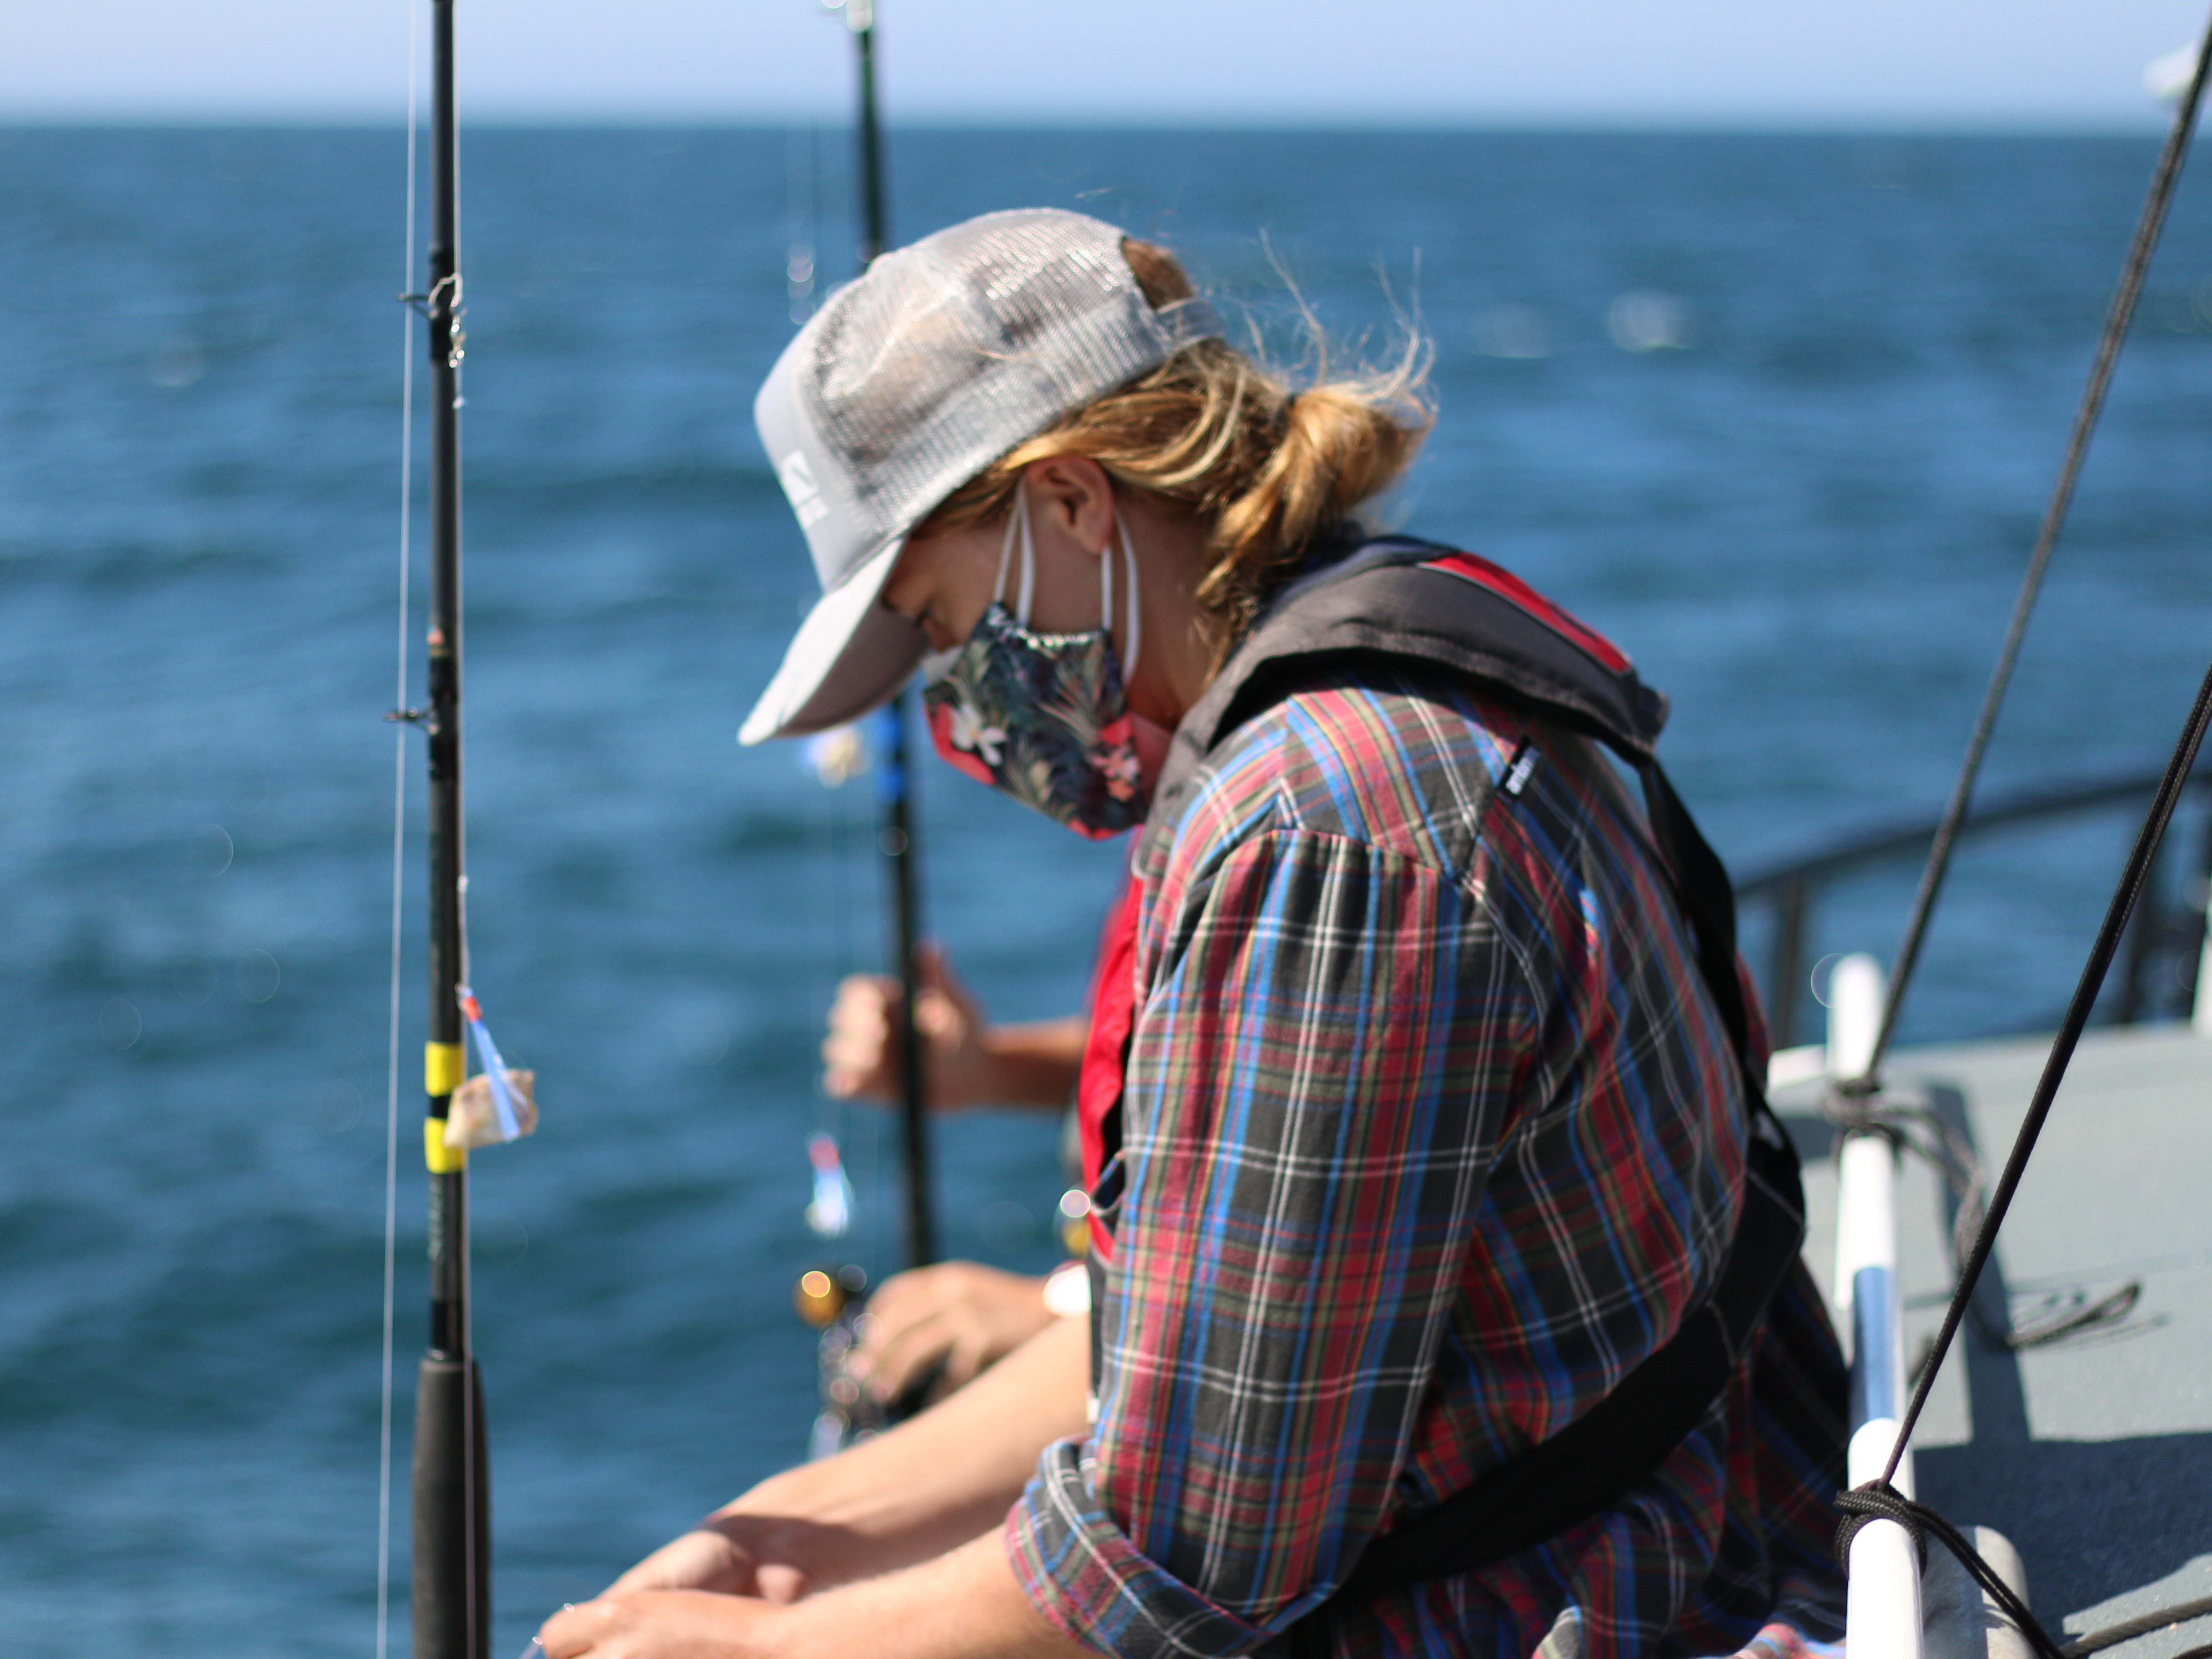 A marine biologist sets up their rig fishing rod to collect fish for tissue burden analyses that monitor the levels of potential contaminants in fish liver and muscle tissues.